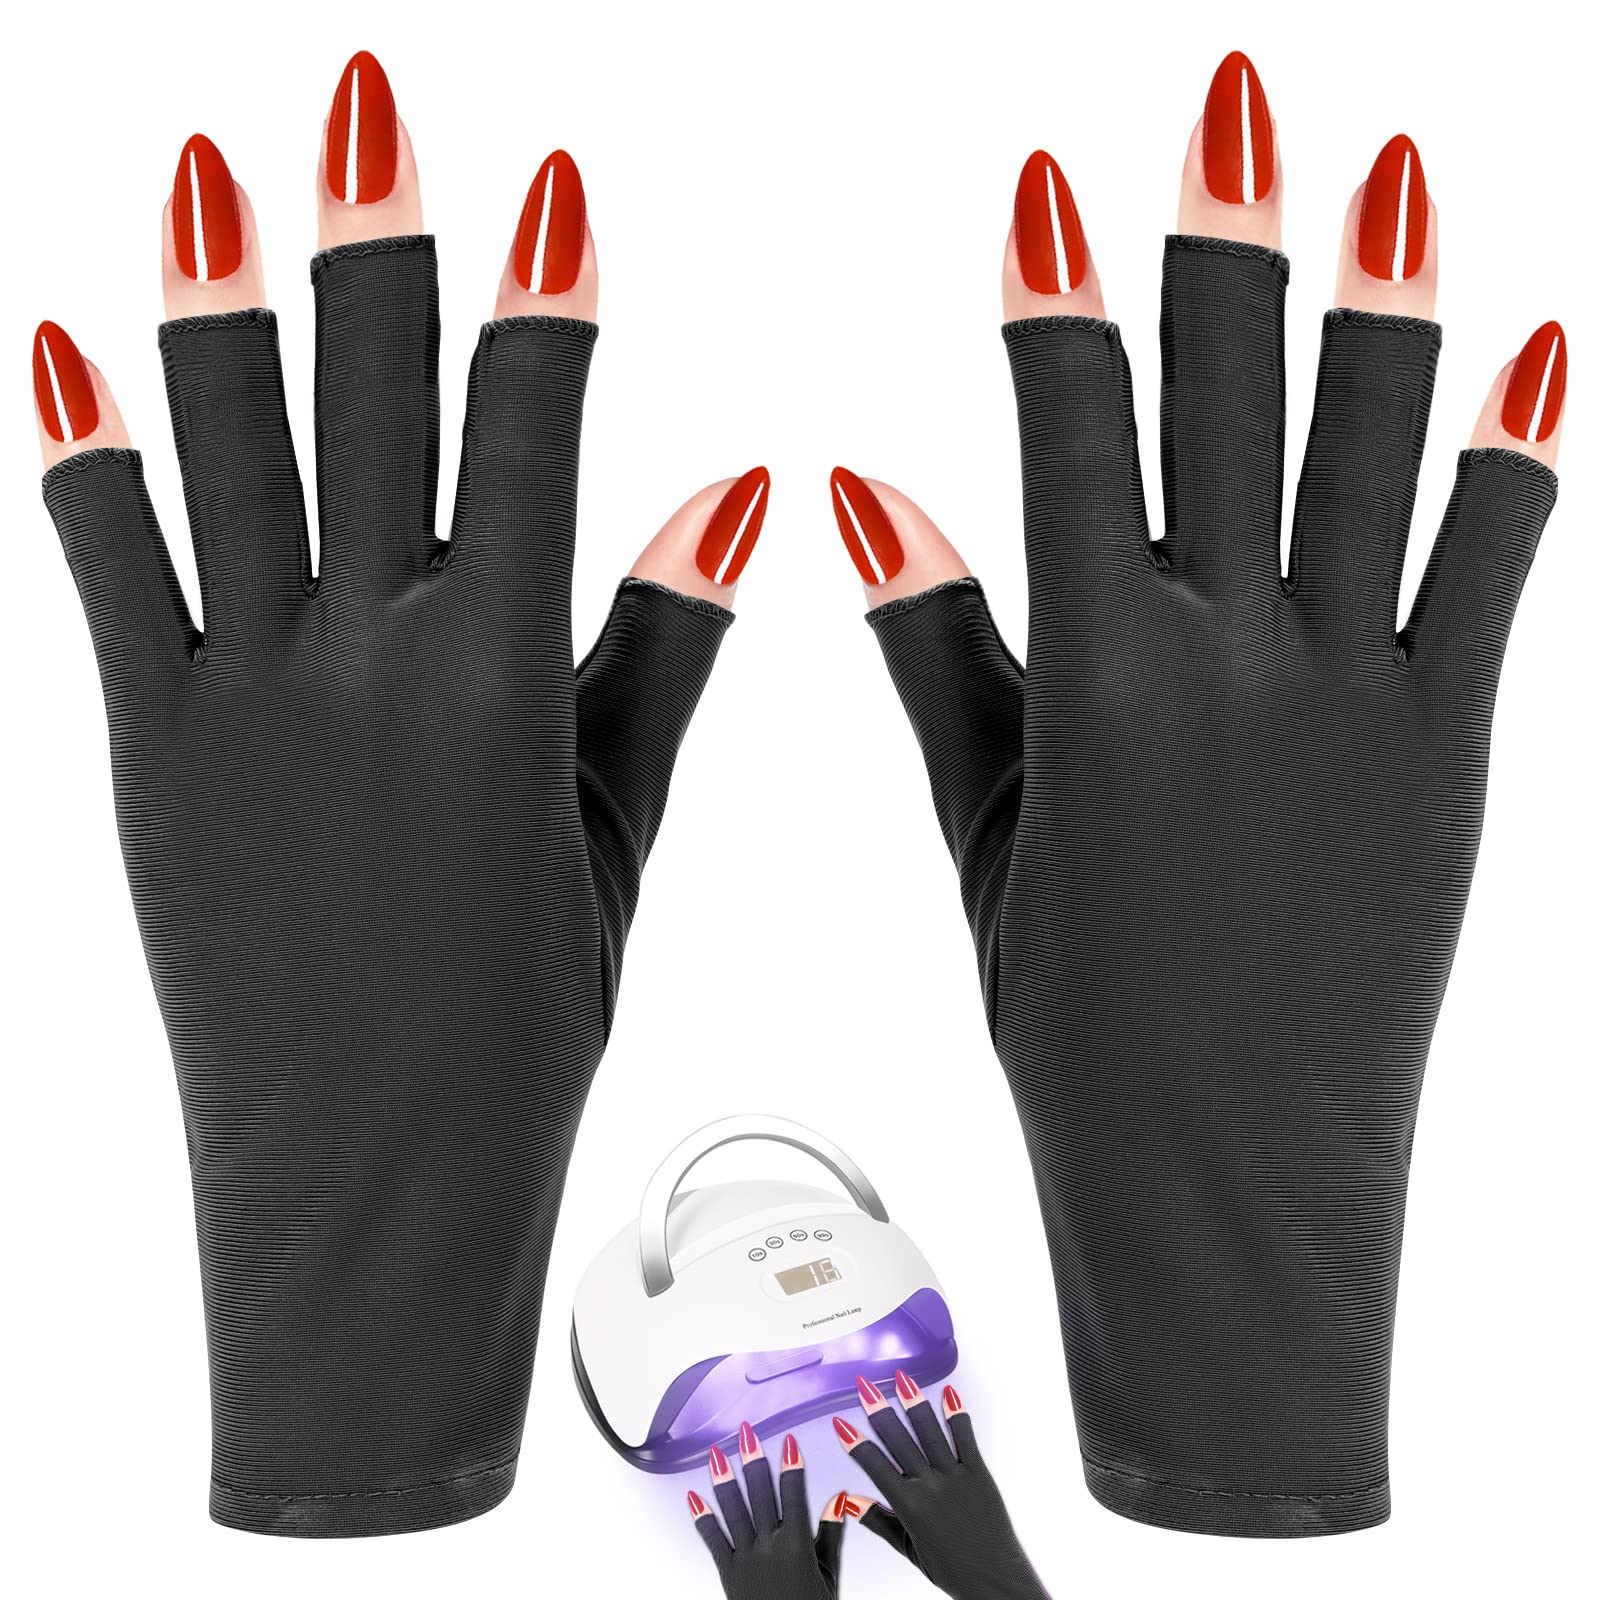 RAYOCON Uv-Gloves-for-Nail Lamp UPF50+ UV Protection Gloves for Manicures  Fingerless Gloves for Protecting